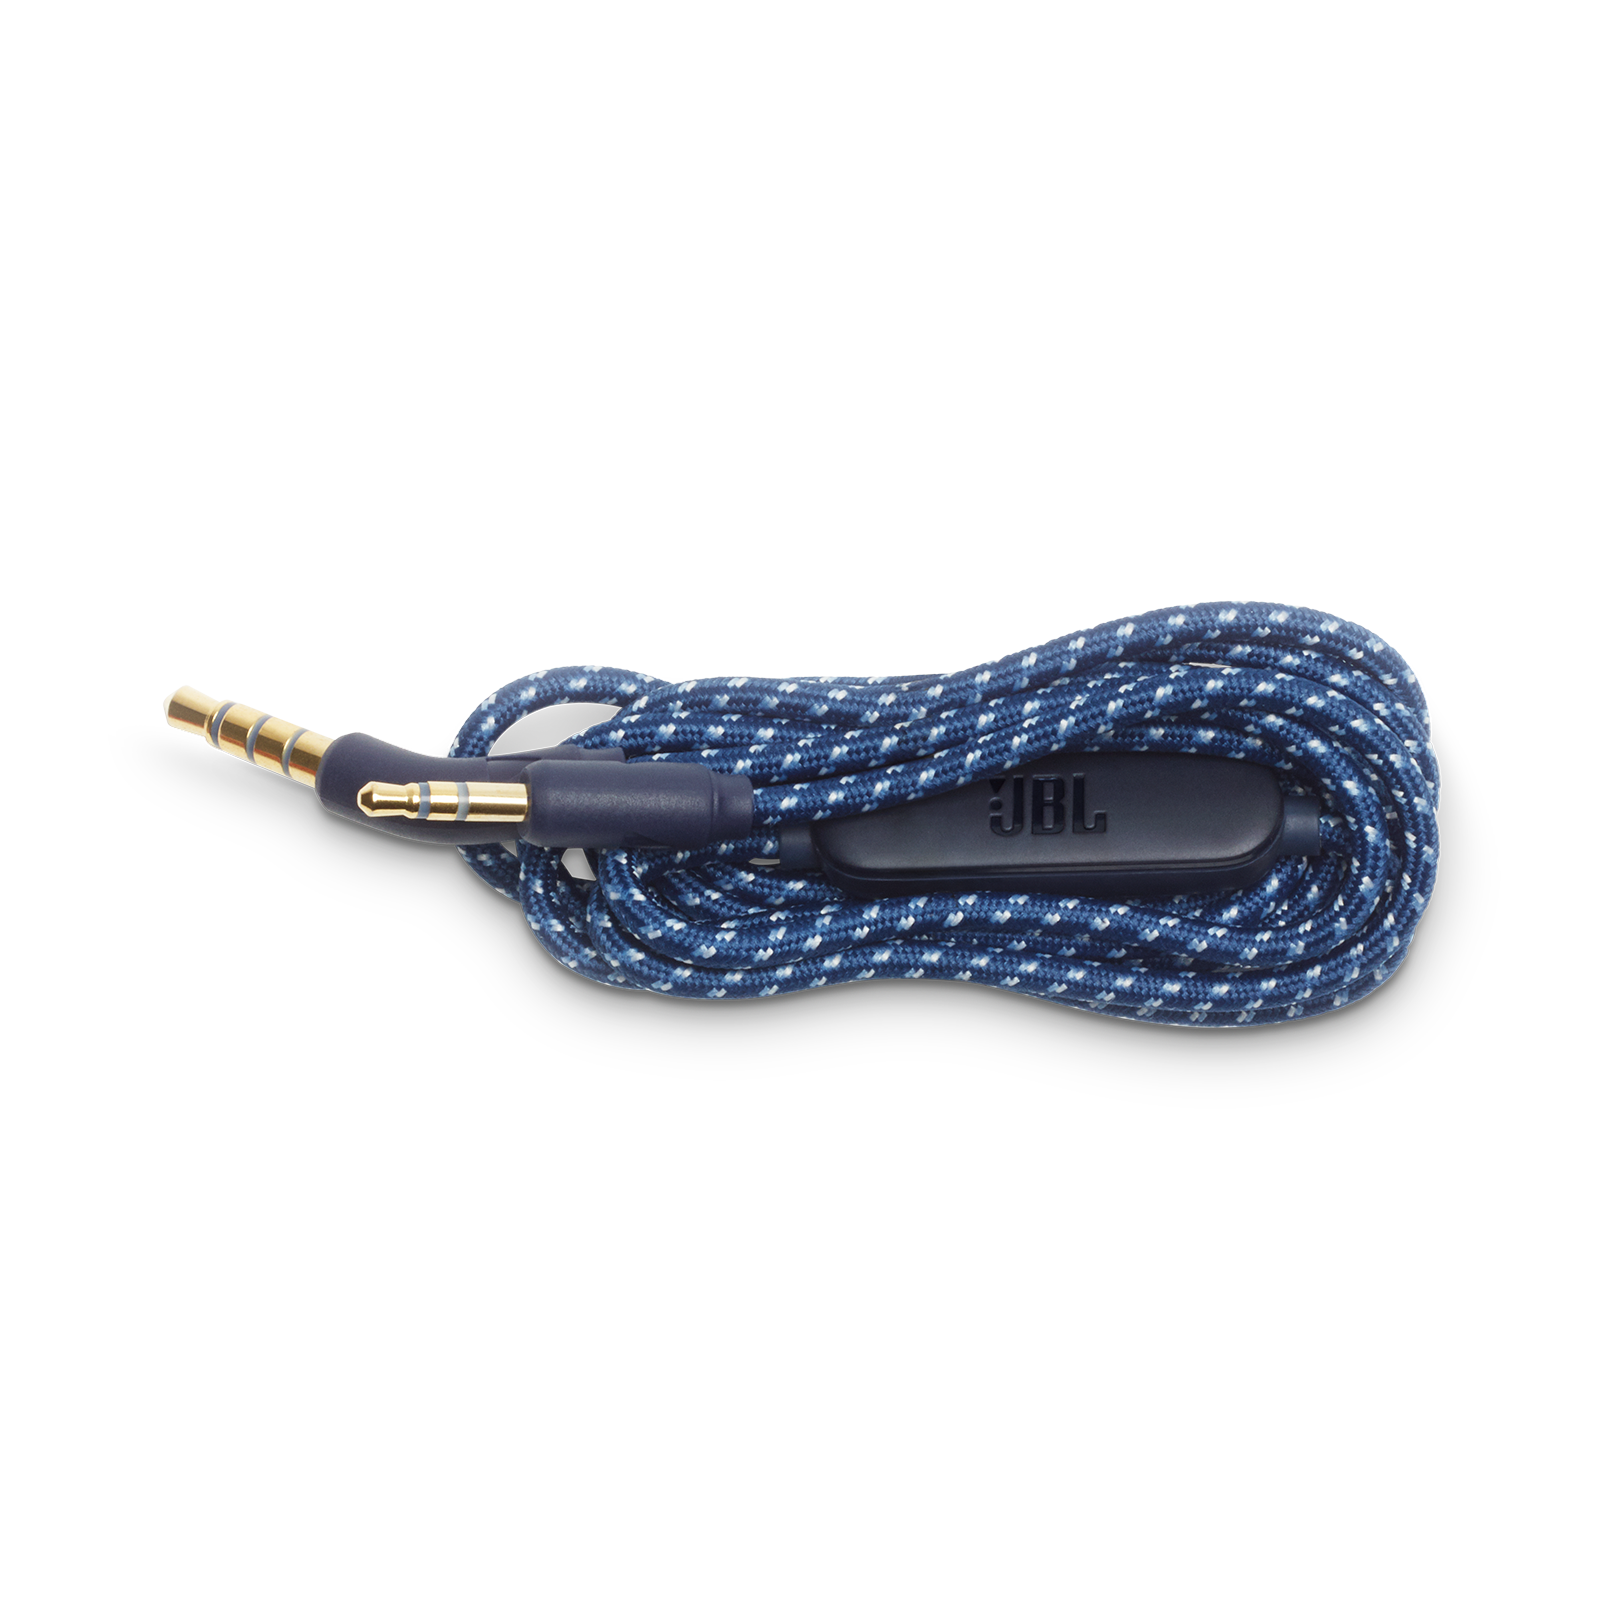 JBL Audio cable for Live 400/500BT - Blue - Audio cable - Hero